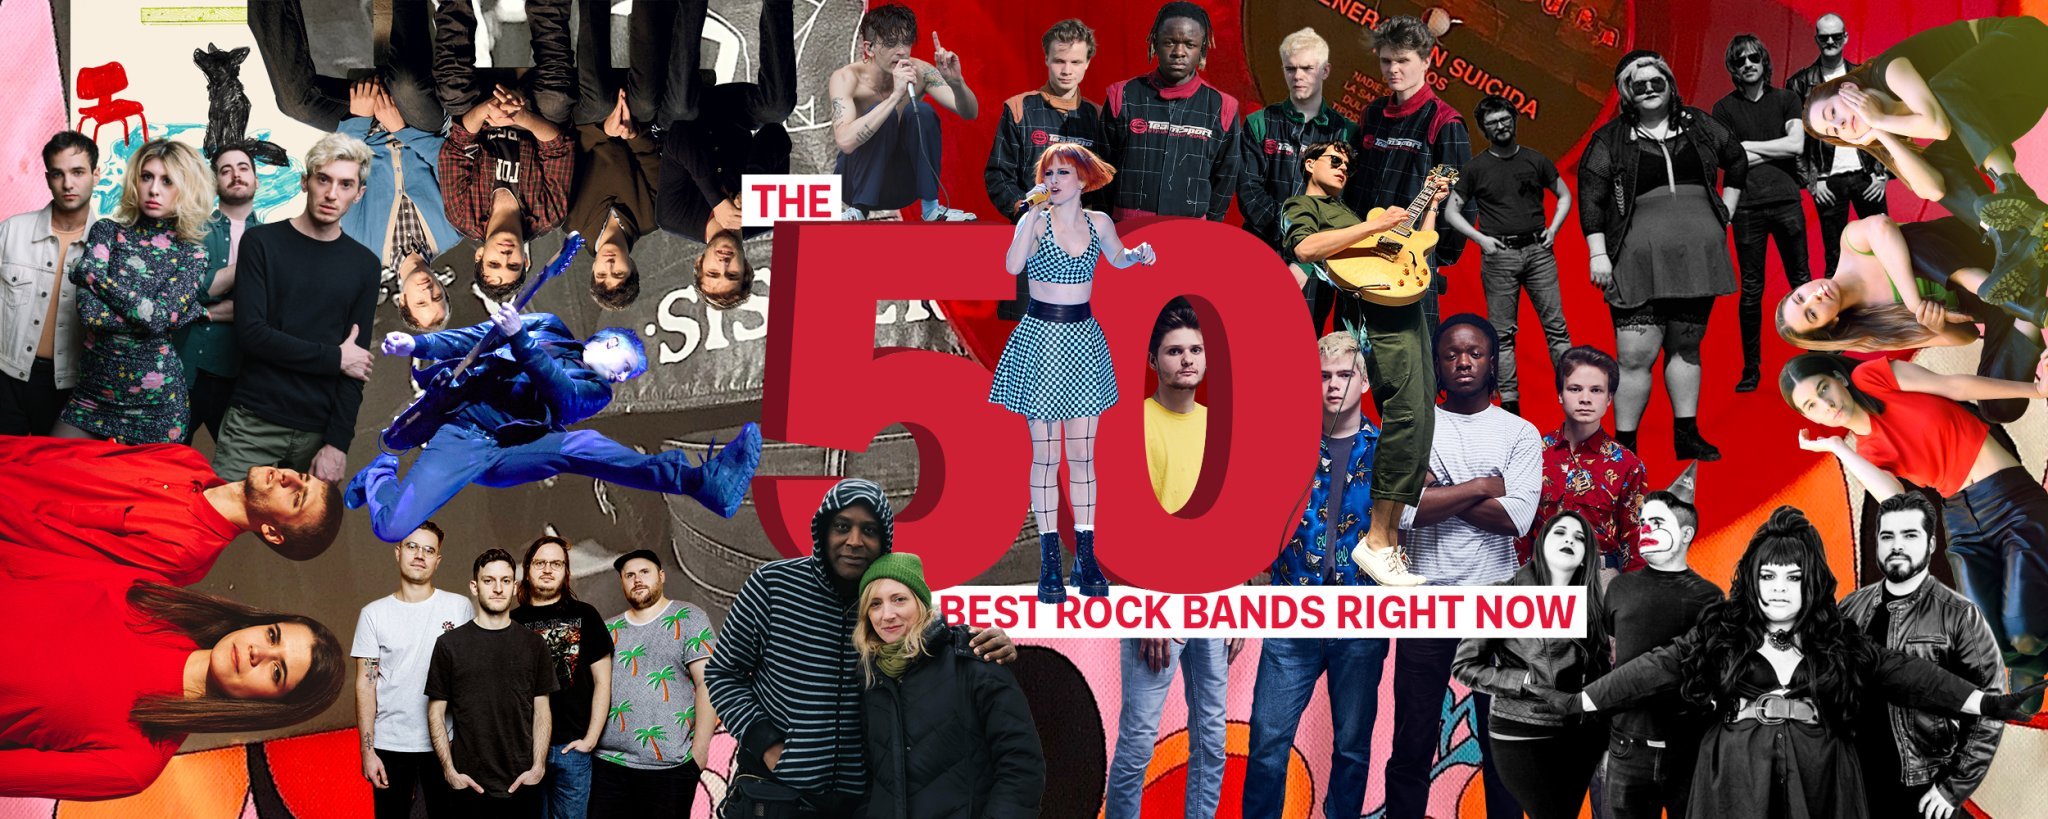 The best rock bands right now